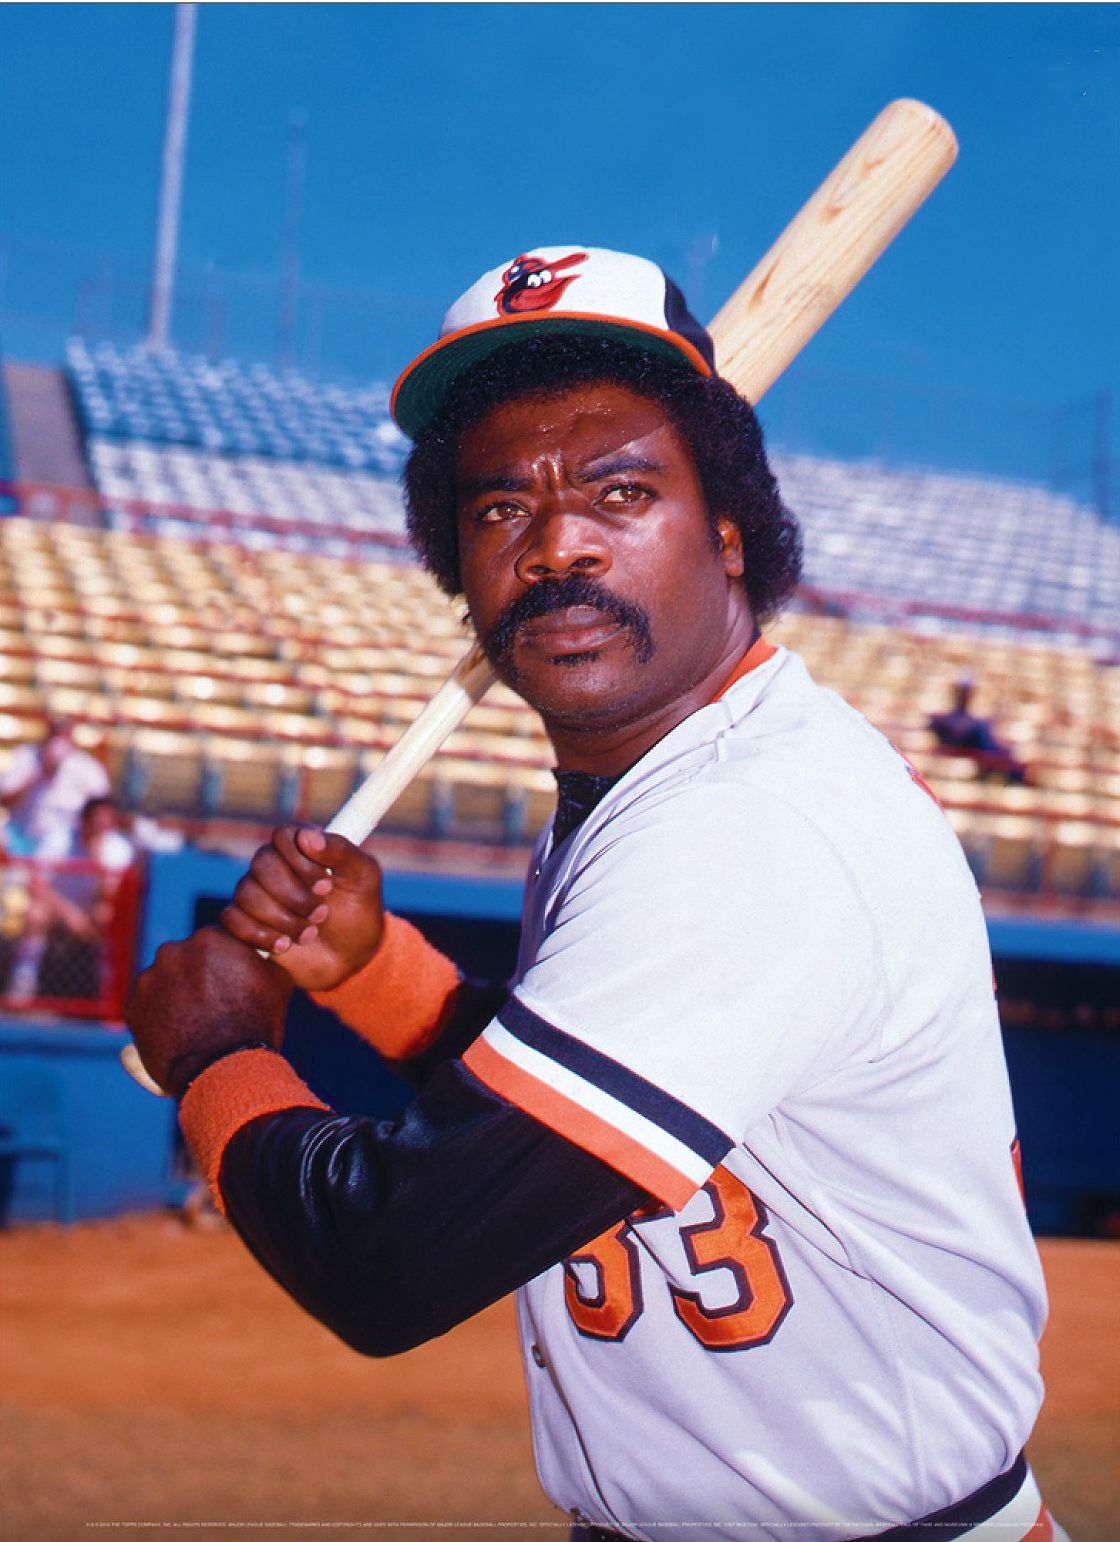 July 22, 1996: Eddie Murray returns to Baltimore with a blast